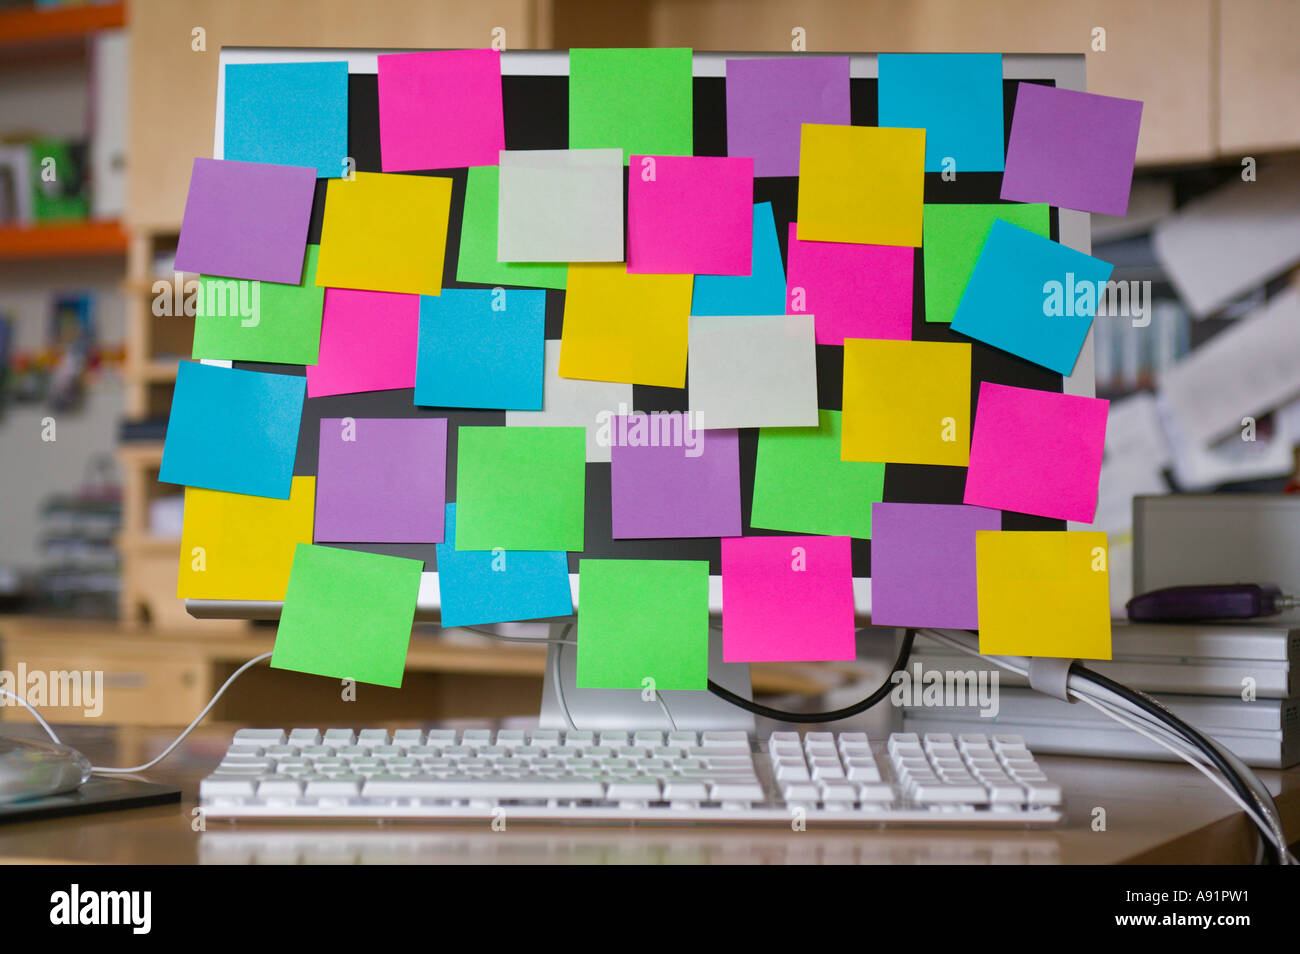 Post It Notes on Computer Monitor Stock Photo - Alamy